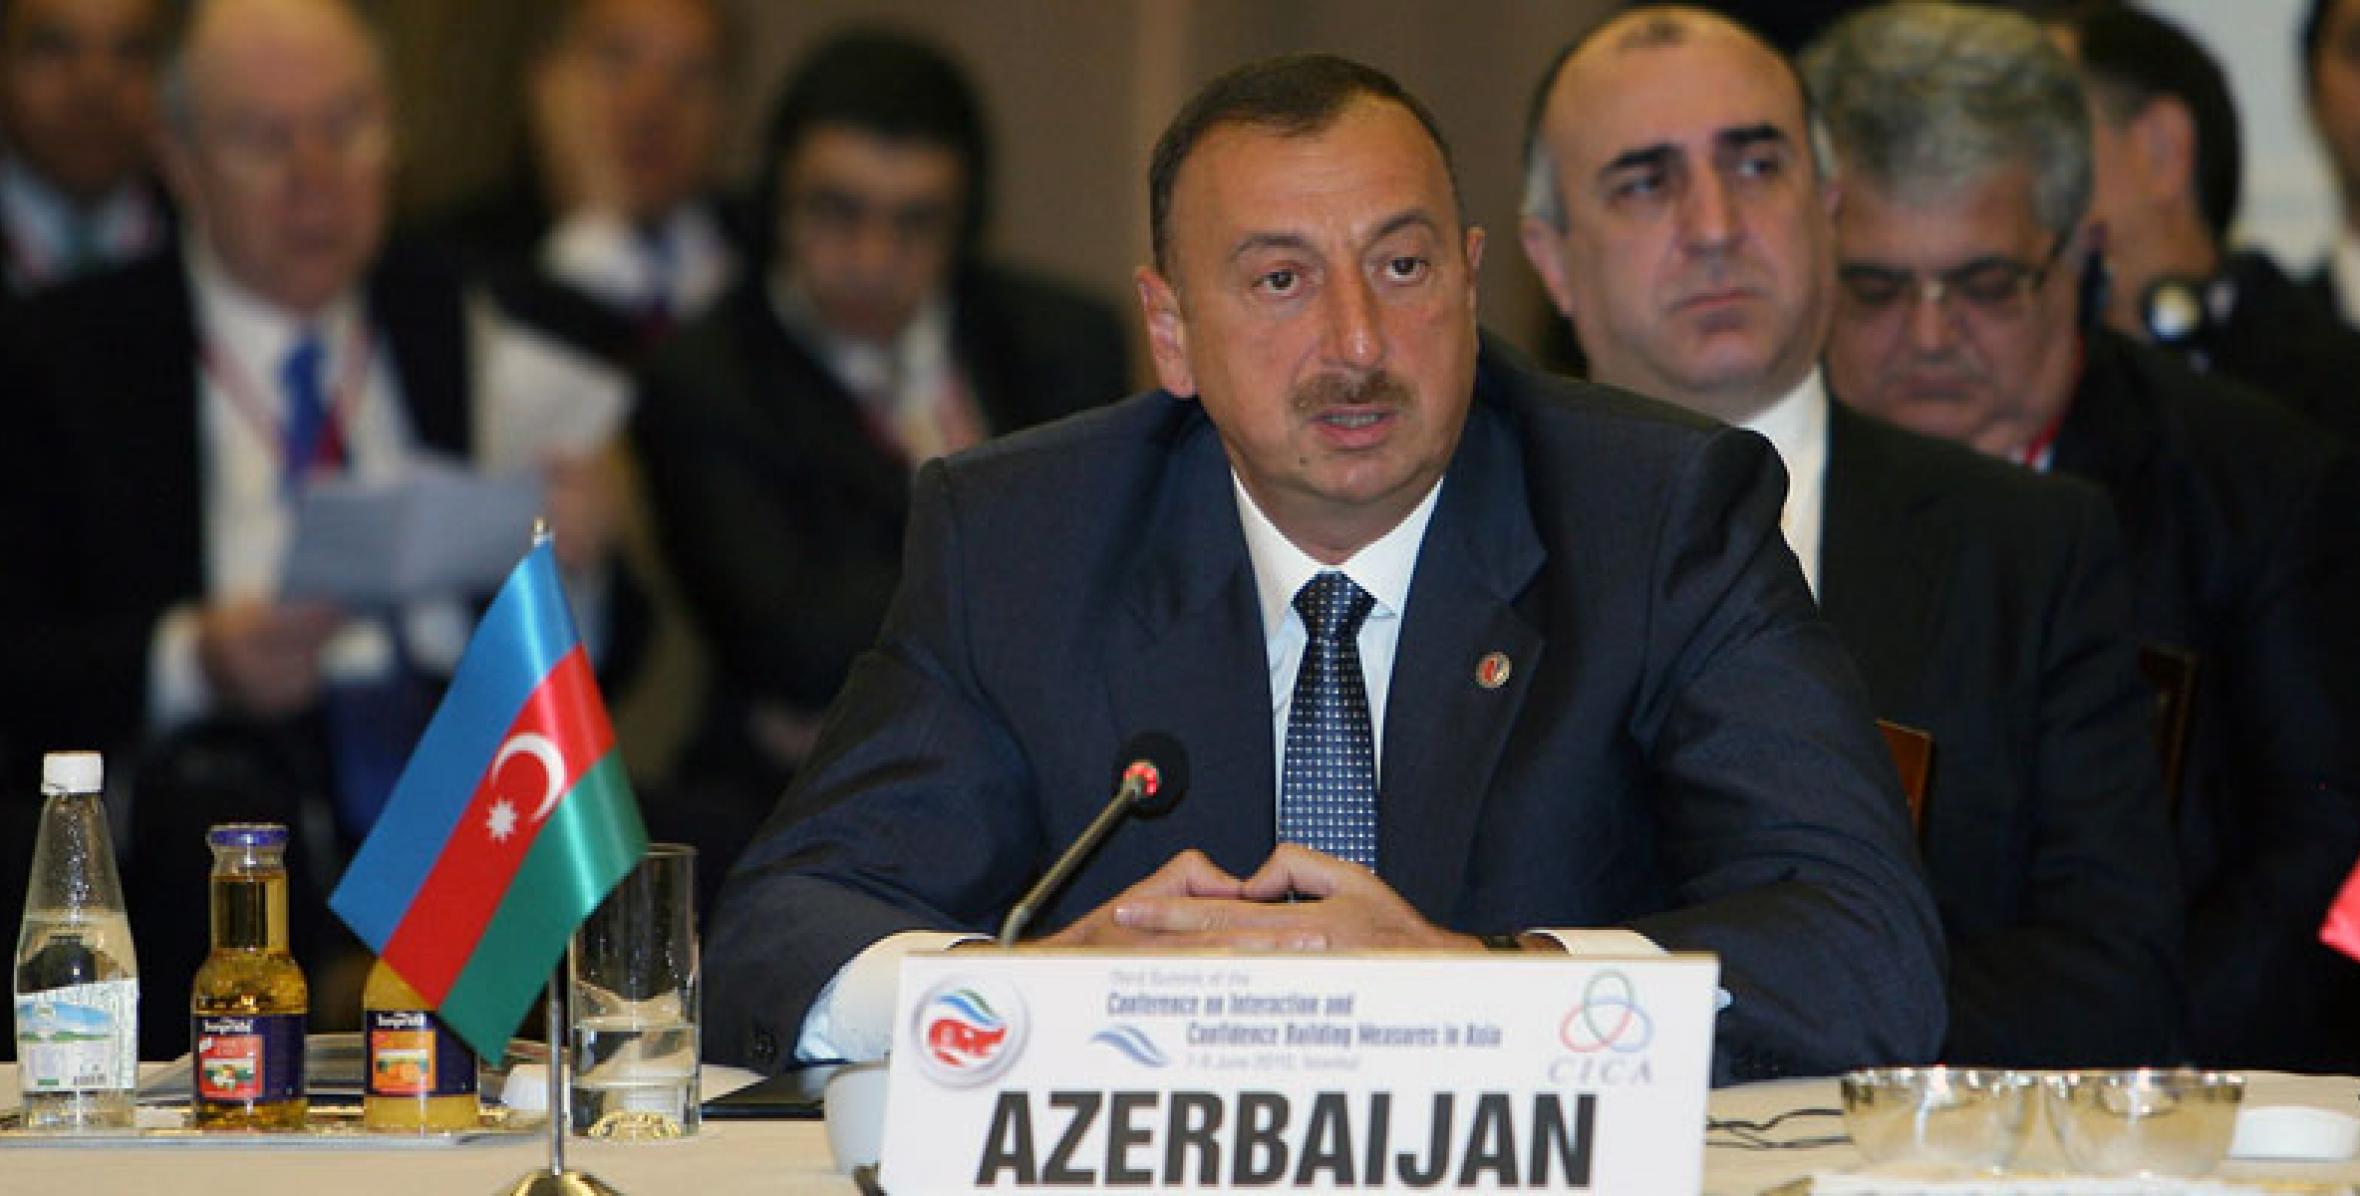 Ilham Aliyev attended the III Summit of the “Conference on Interaction and Confidence-Building Measures in Asia”